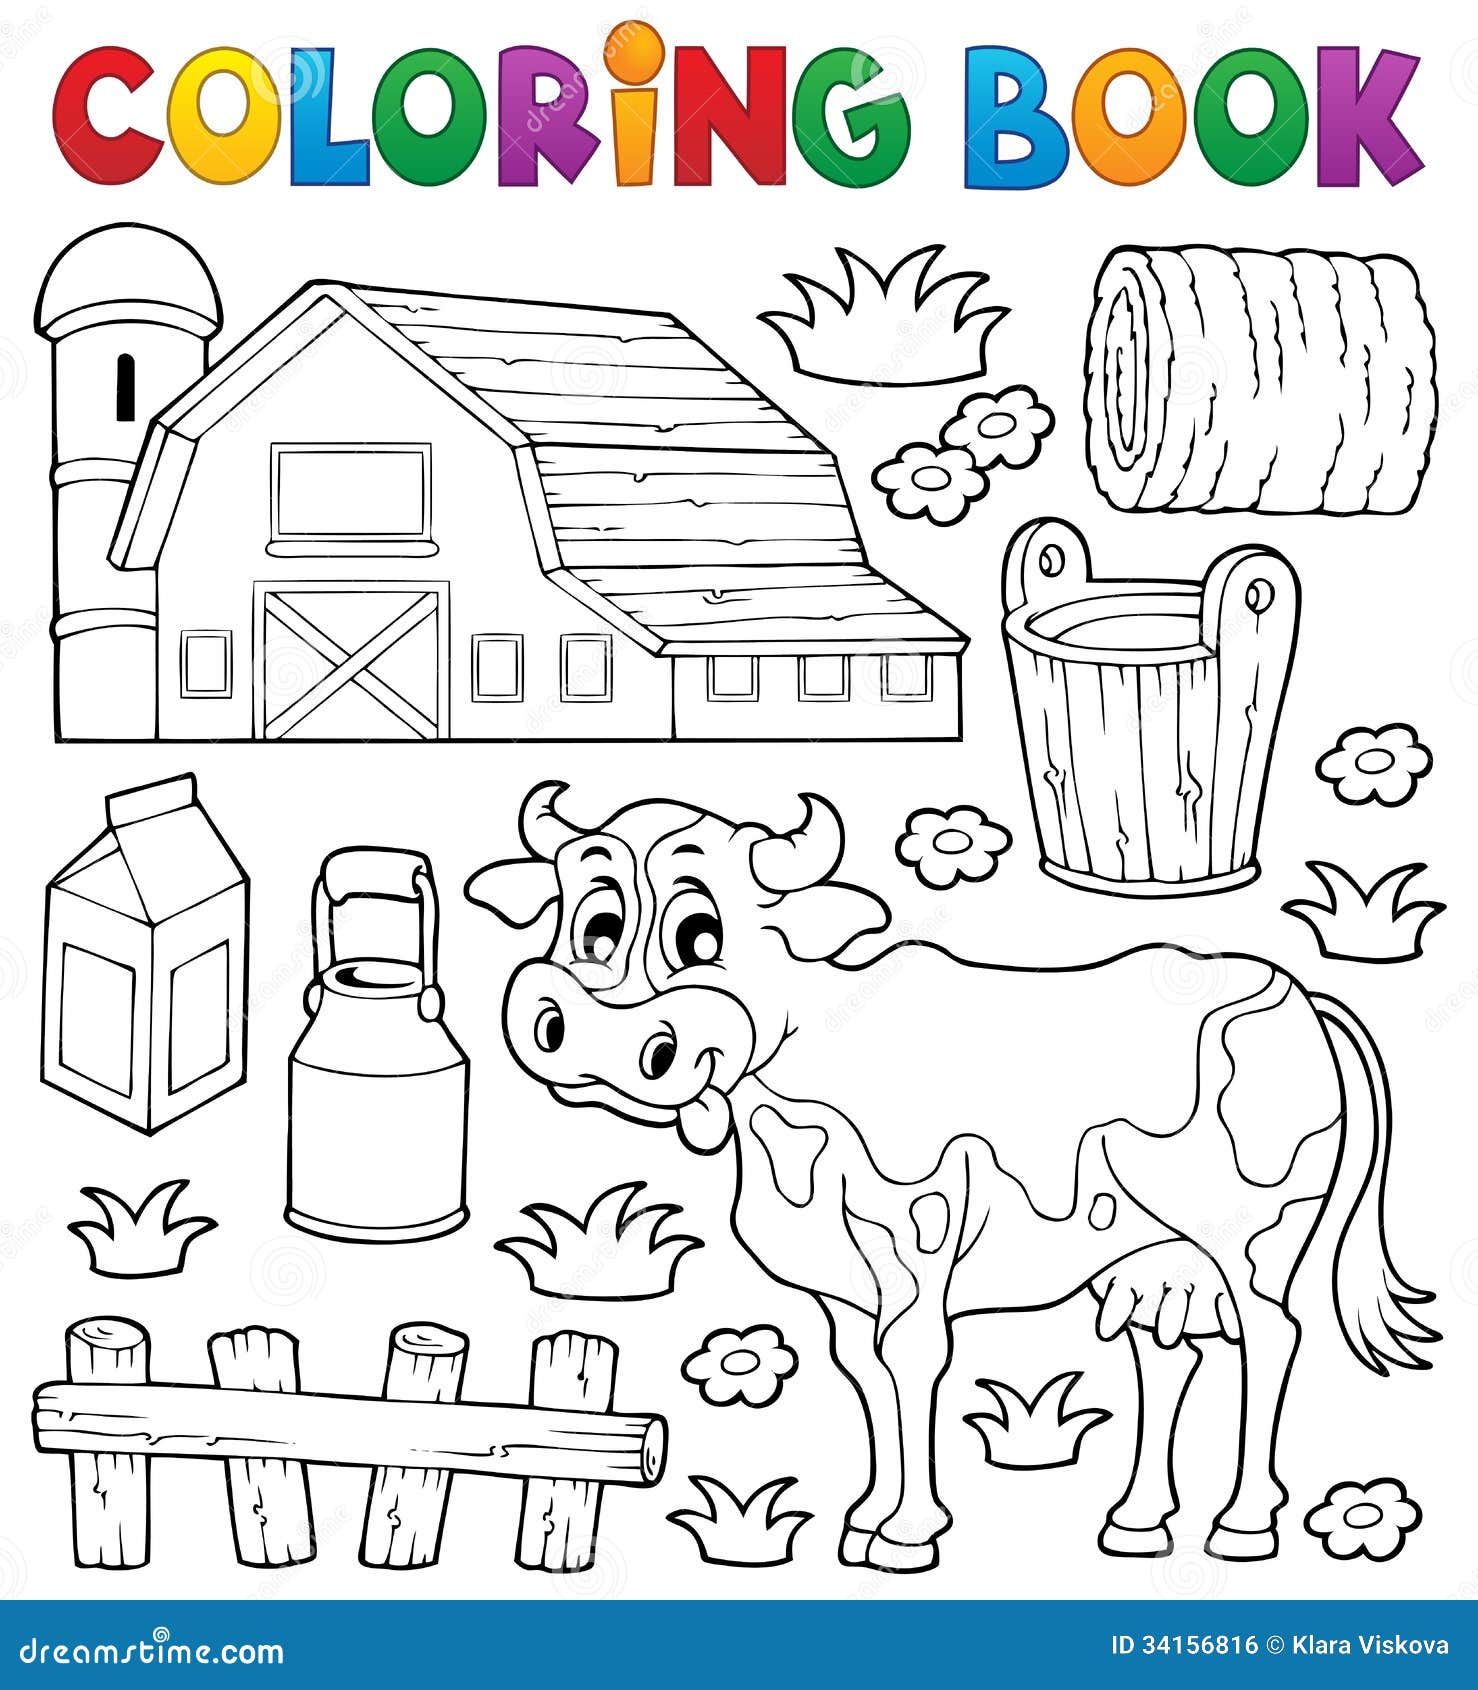 Coloring Book Cow Theme 1 Royalty Free Stock Image - Image: 34156816